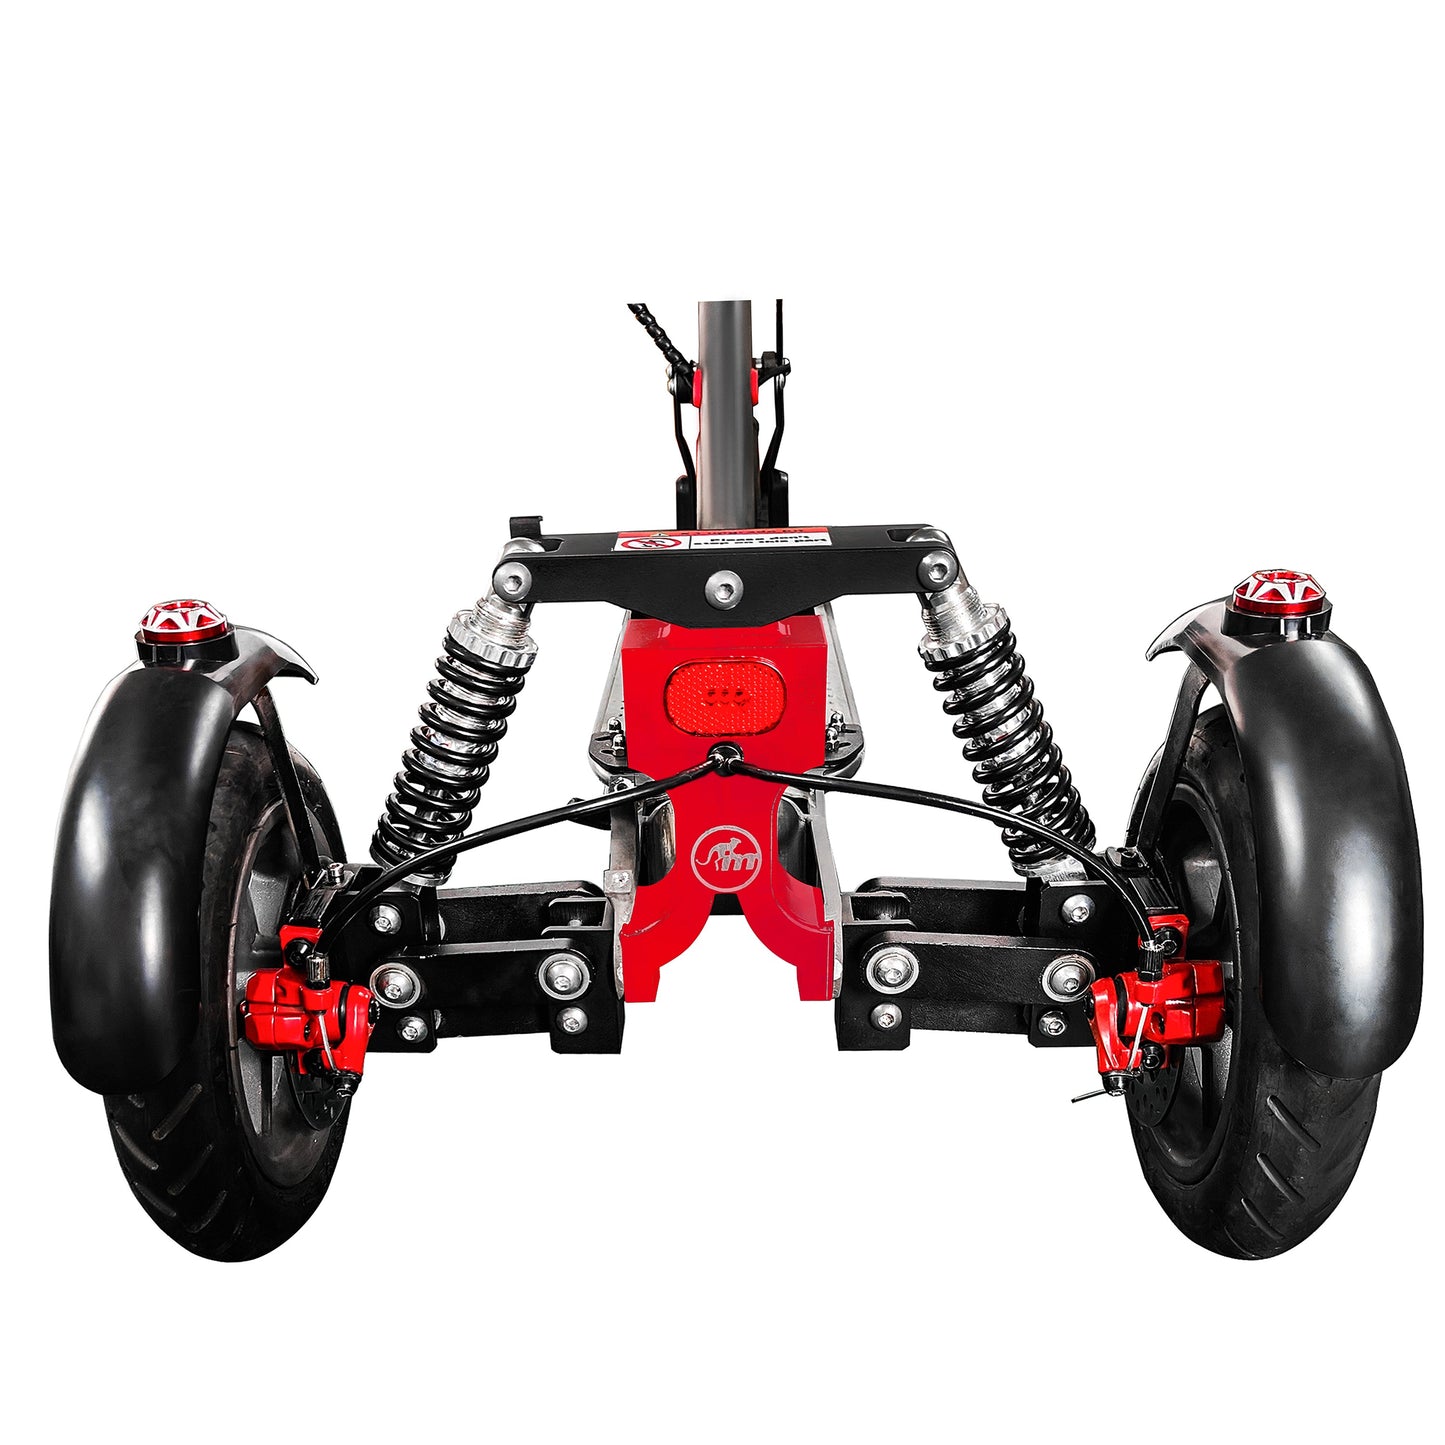 Monorim X3 upgrade kit to be Three wheels special for xiaomi m365 scooter